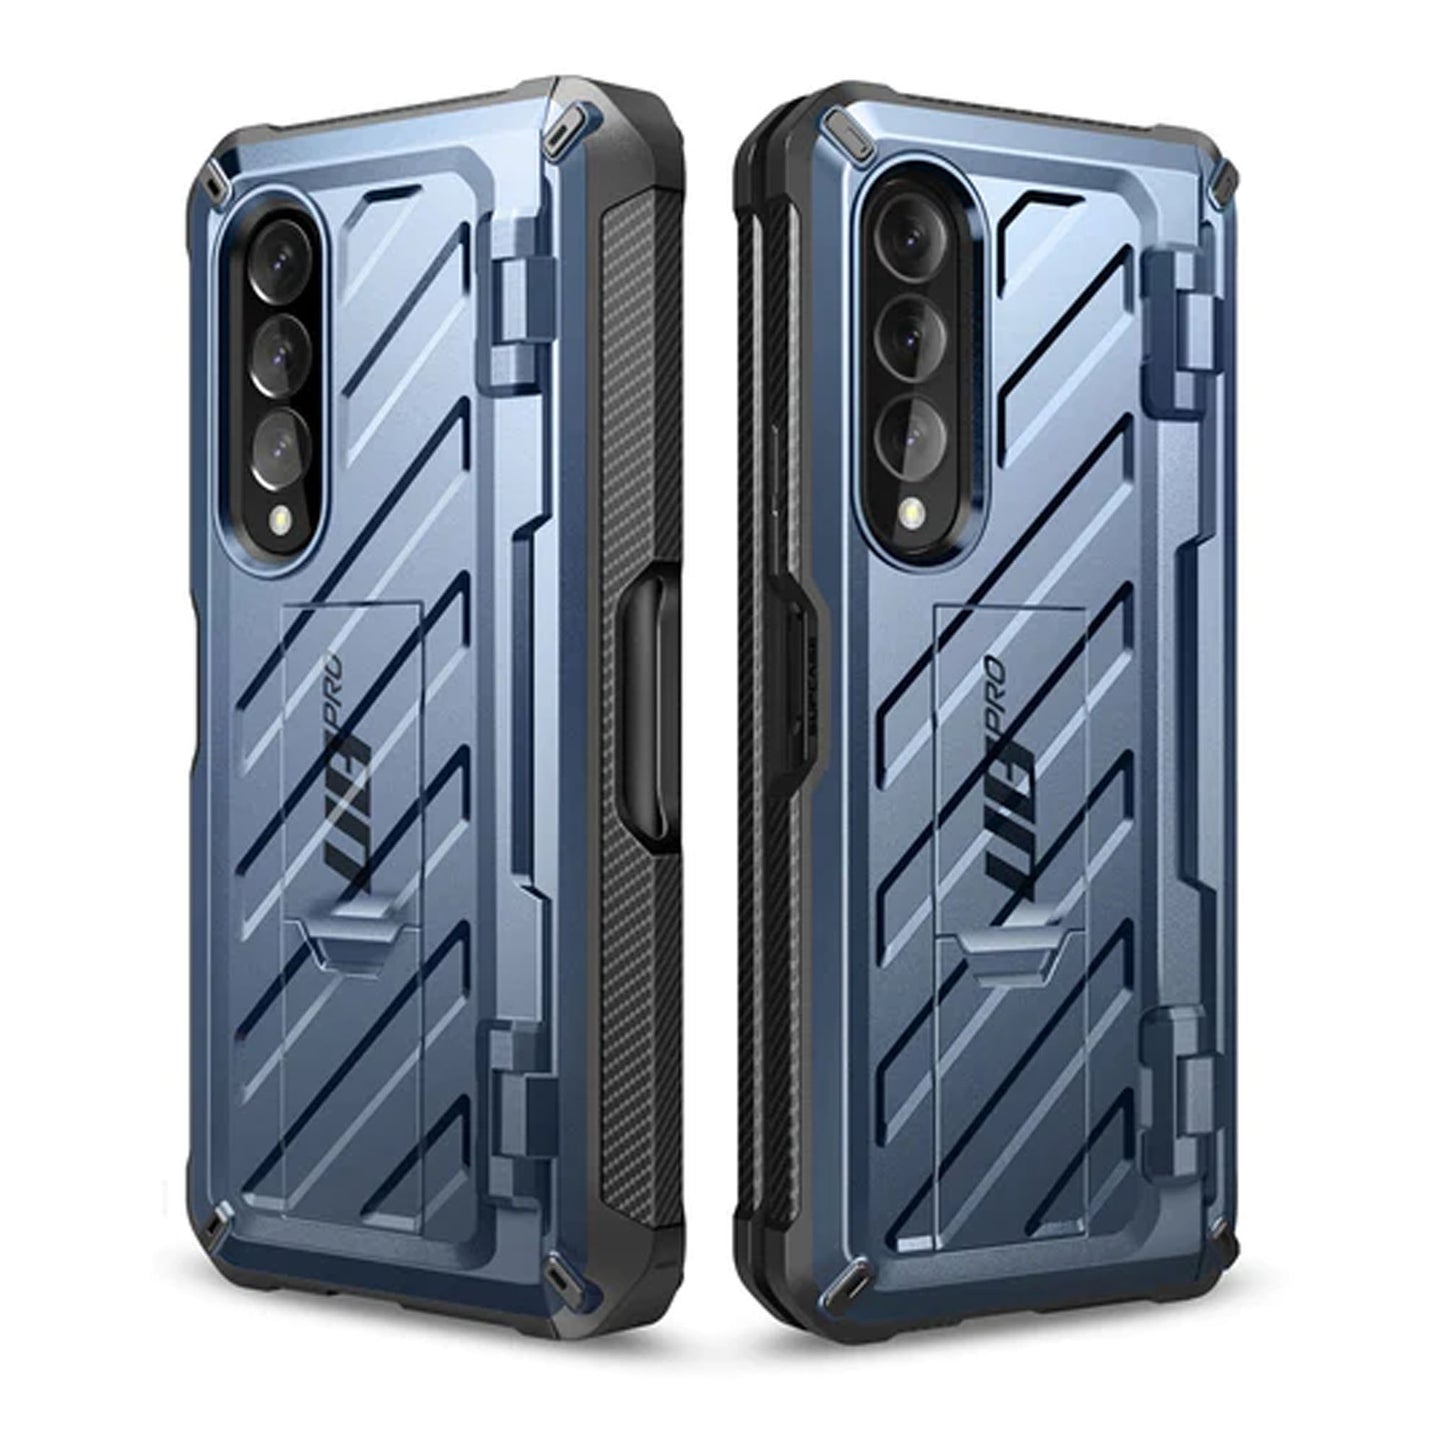 Supcase Unicorn Beetle Pro Rugged Case for Samsung Galaxy Z Fold 4 with Built-in Screen Protector - Metallic Blue